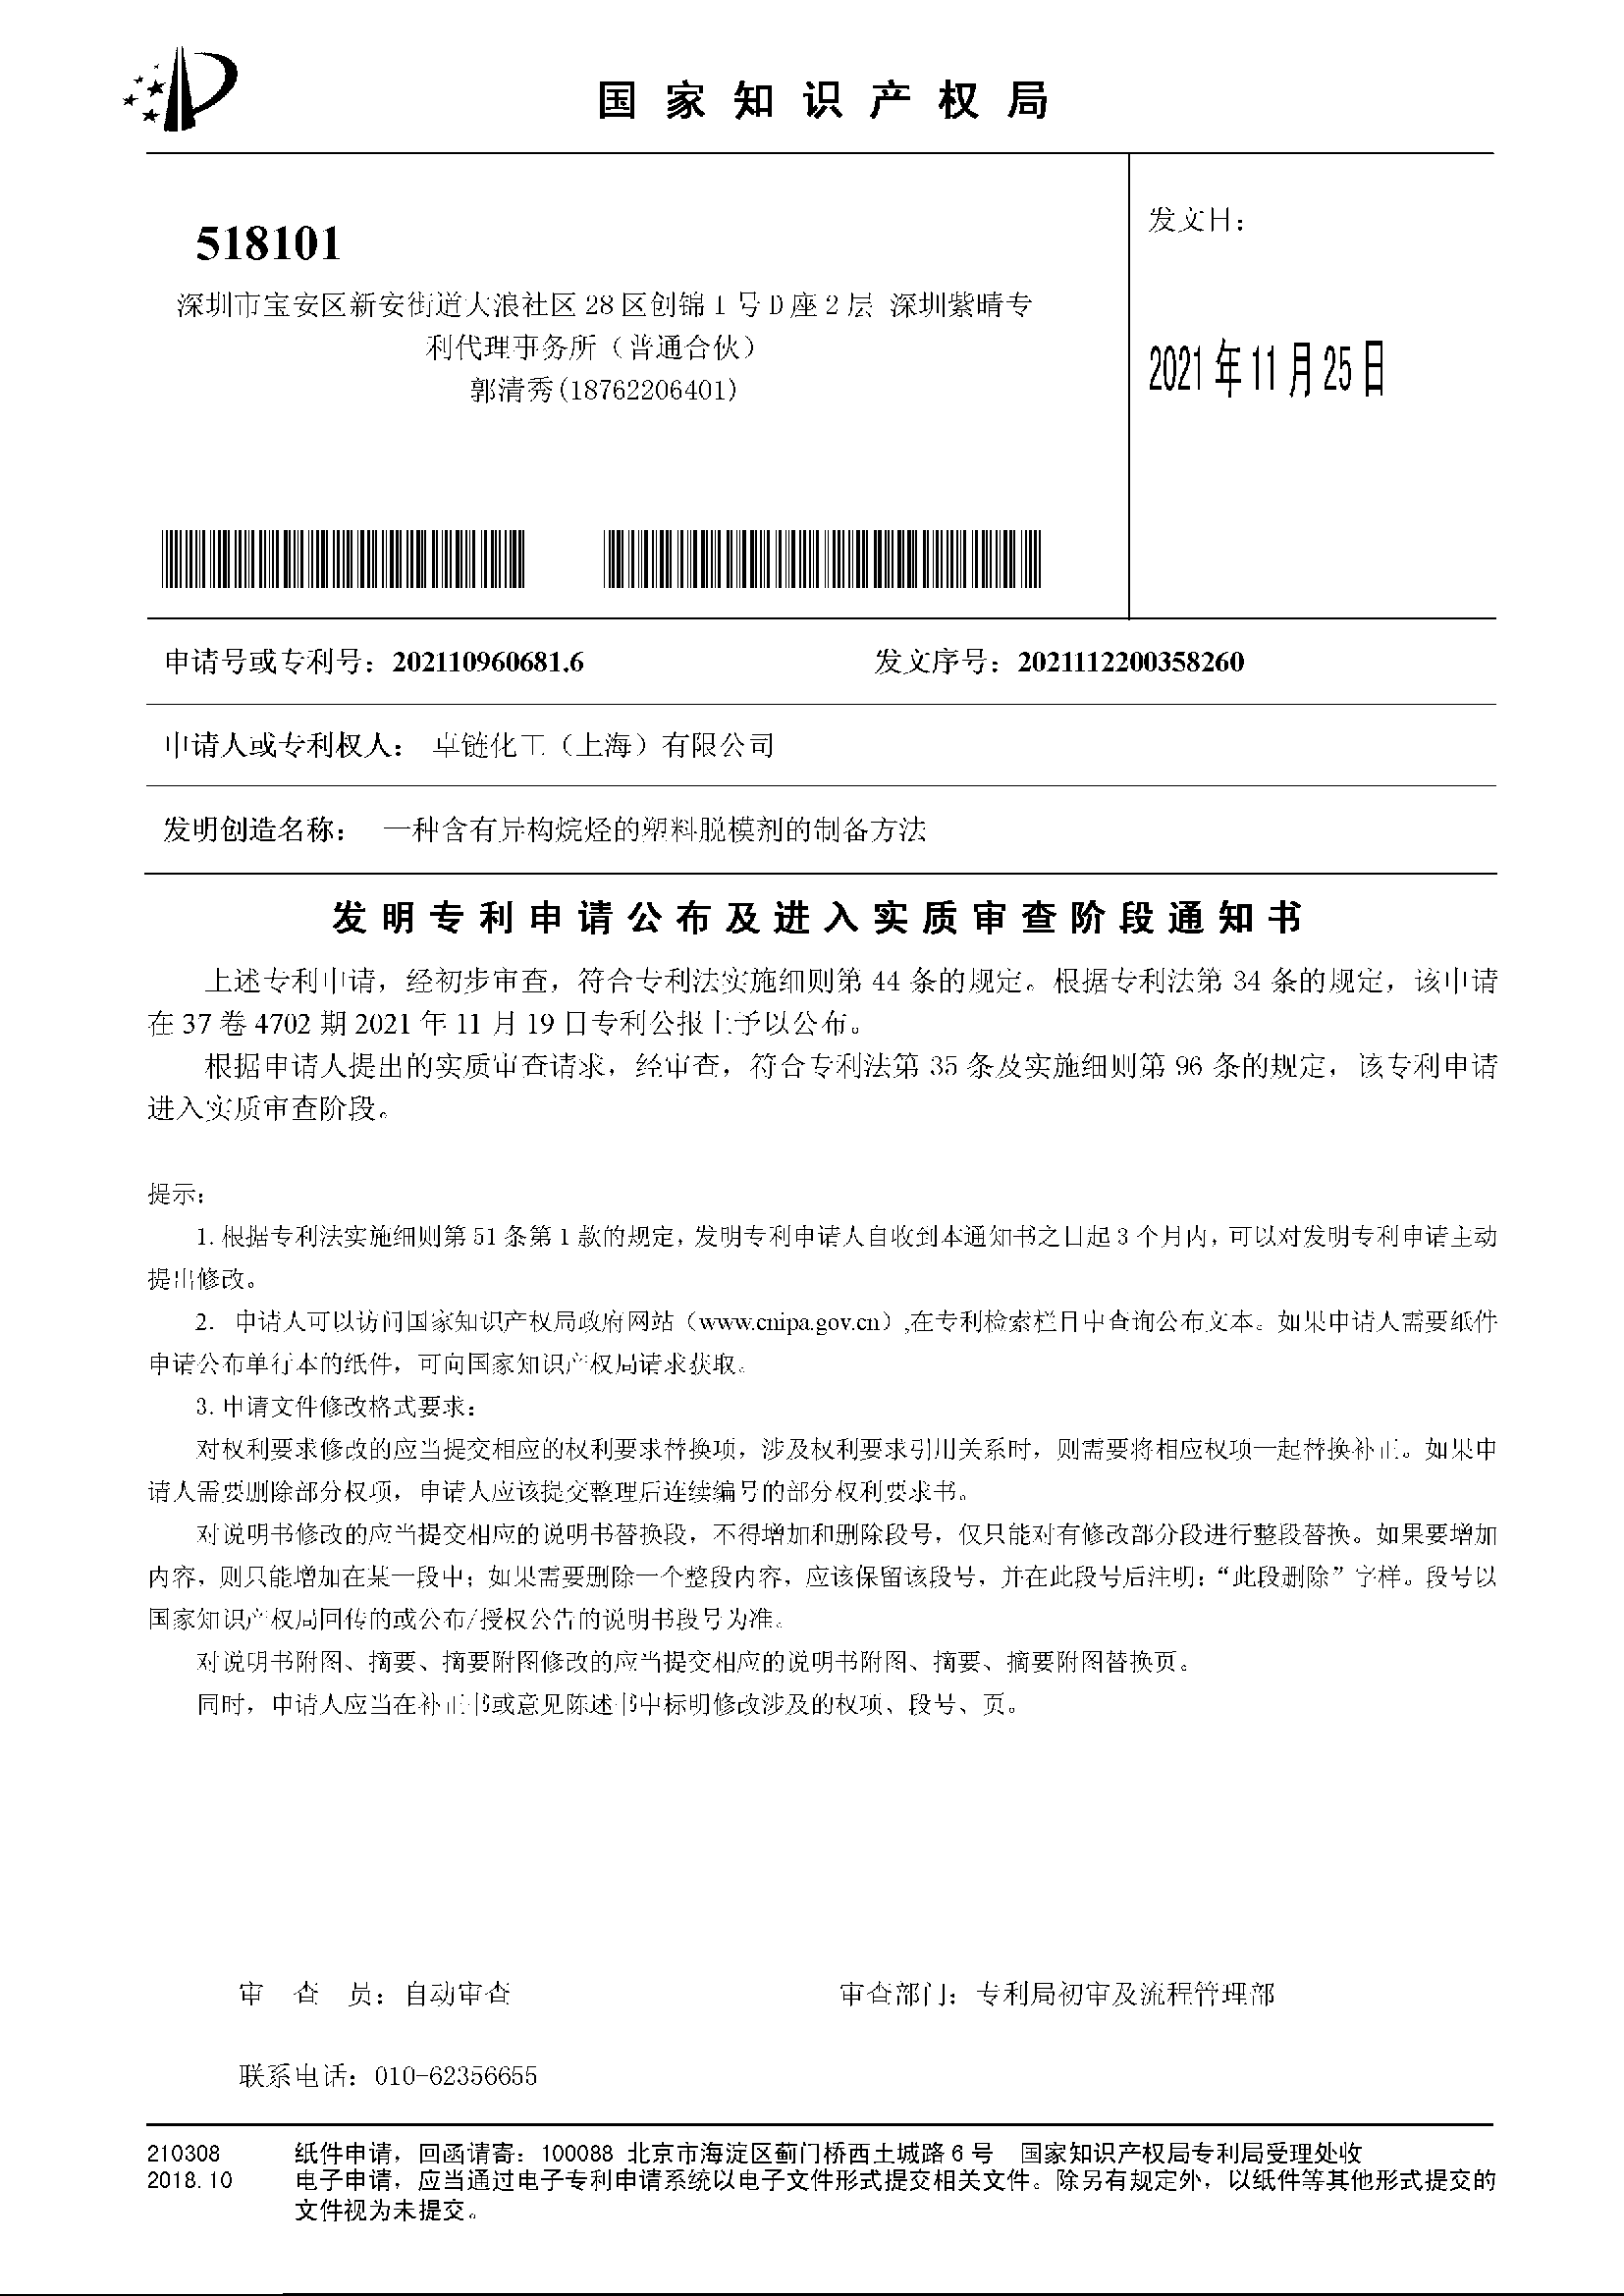 Isoparaffin release agent patent.png